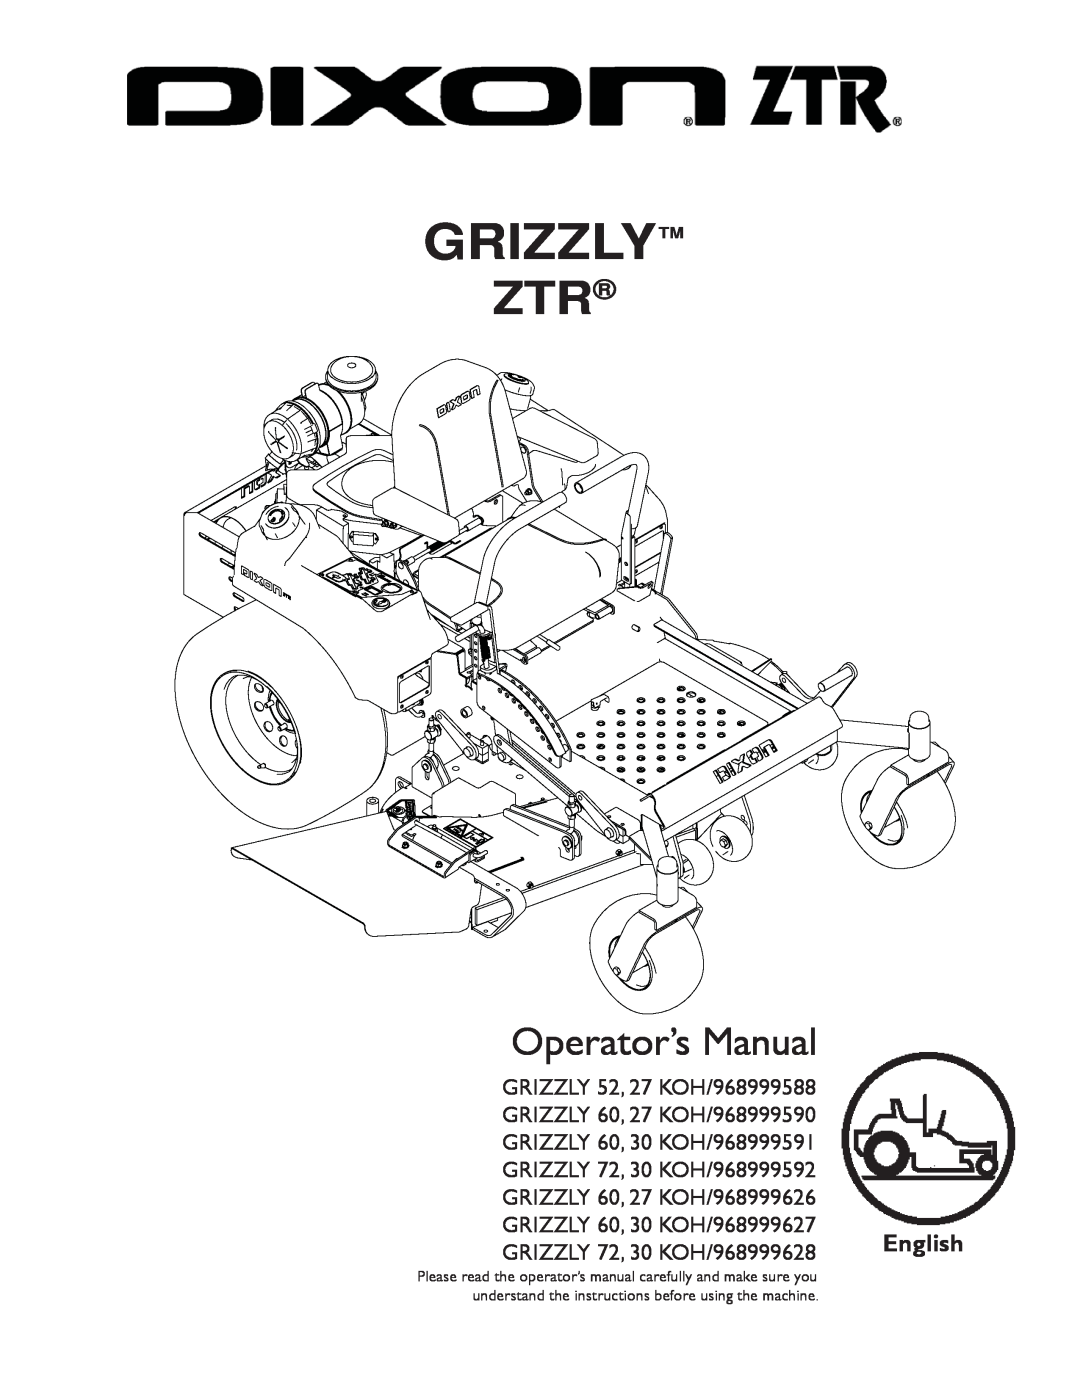 Dixon 30 KOH/968999591 manual Grizzly, Operator’s Manual, GRIZZLY 52, 27 KOH/968999588, GRIZZLY 60, 27 KOH/968999590 